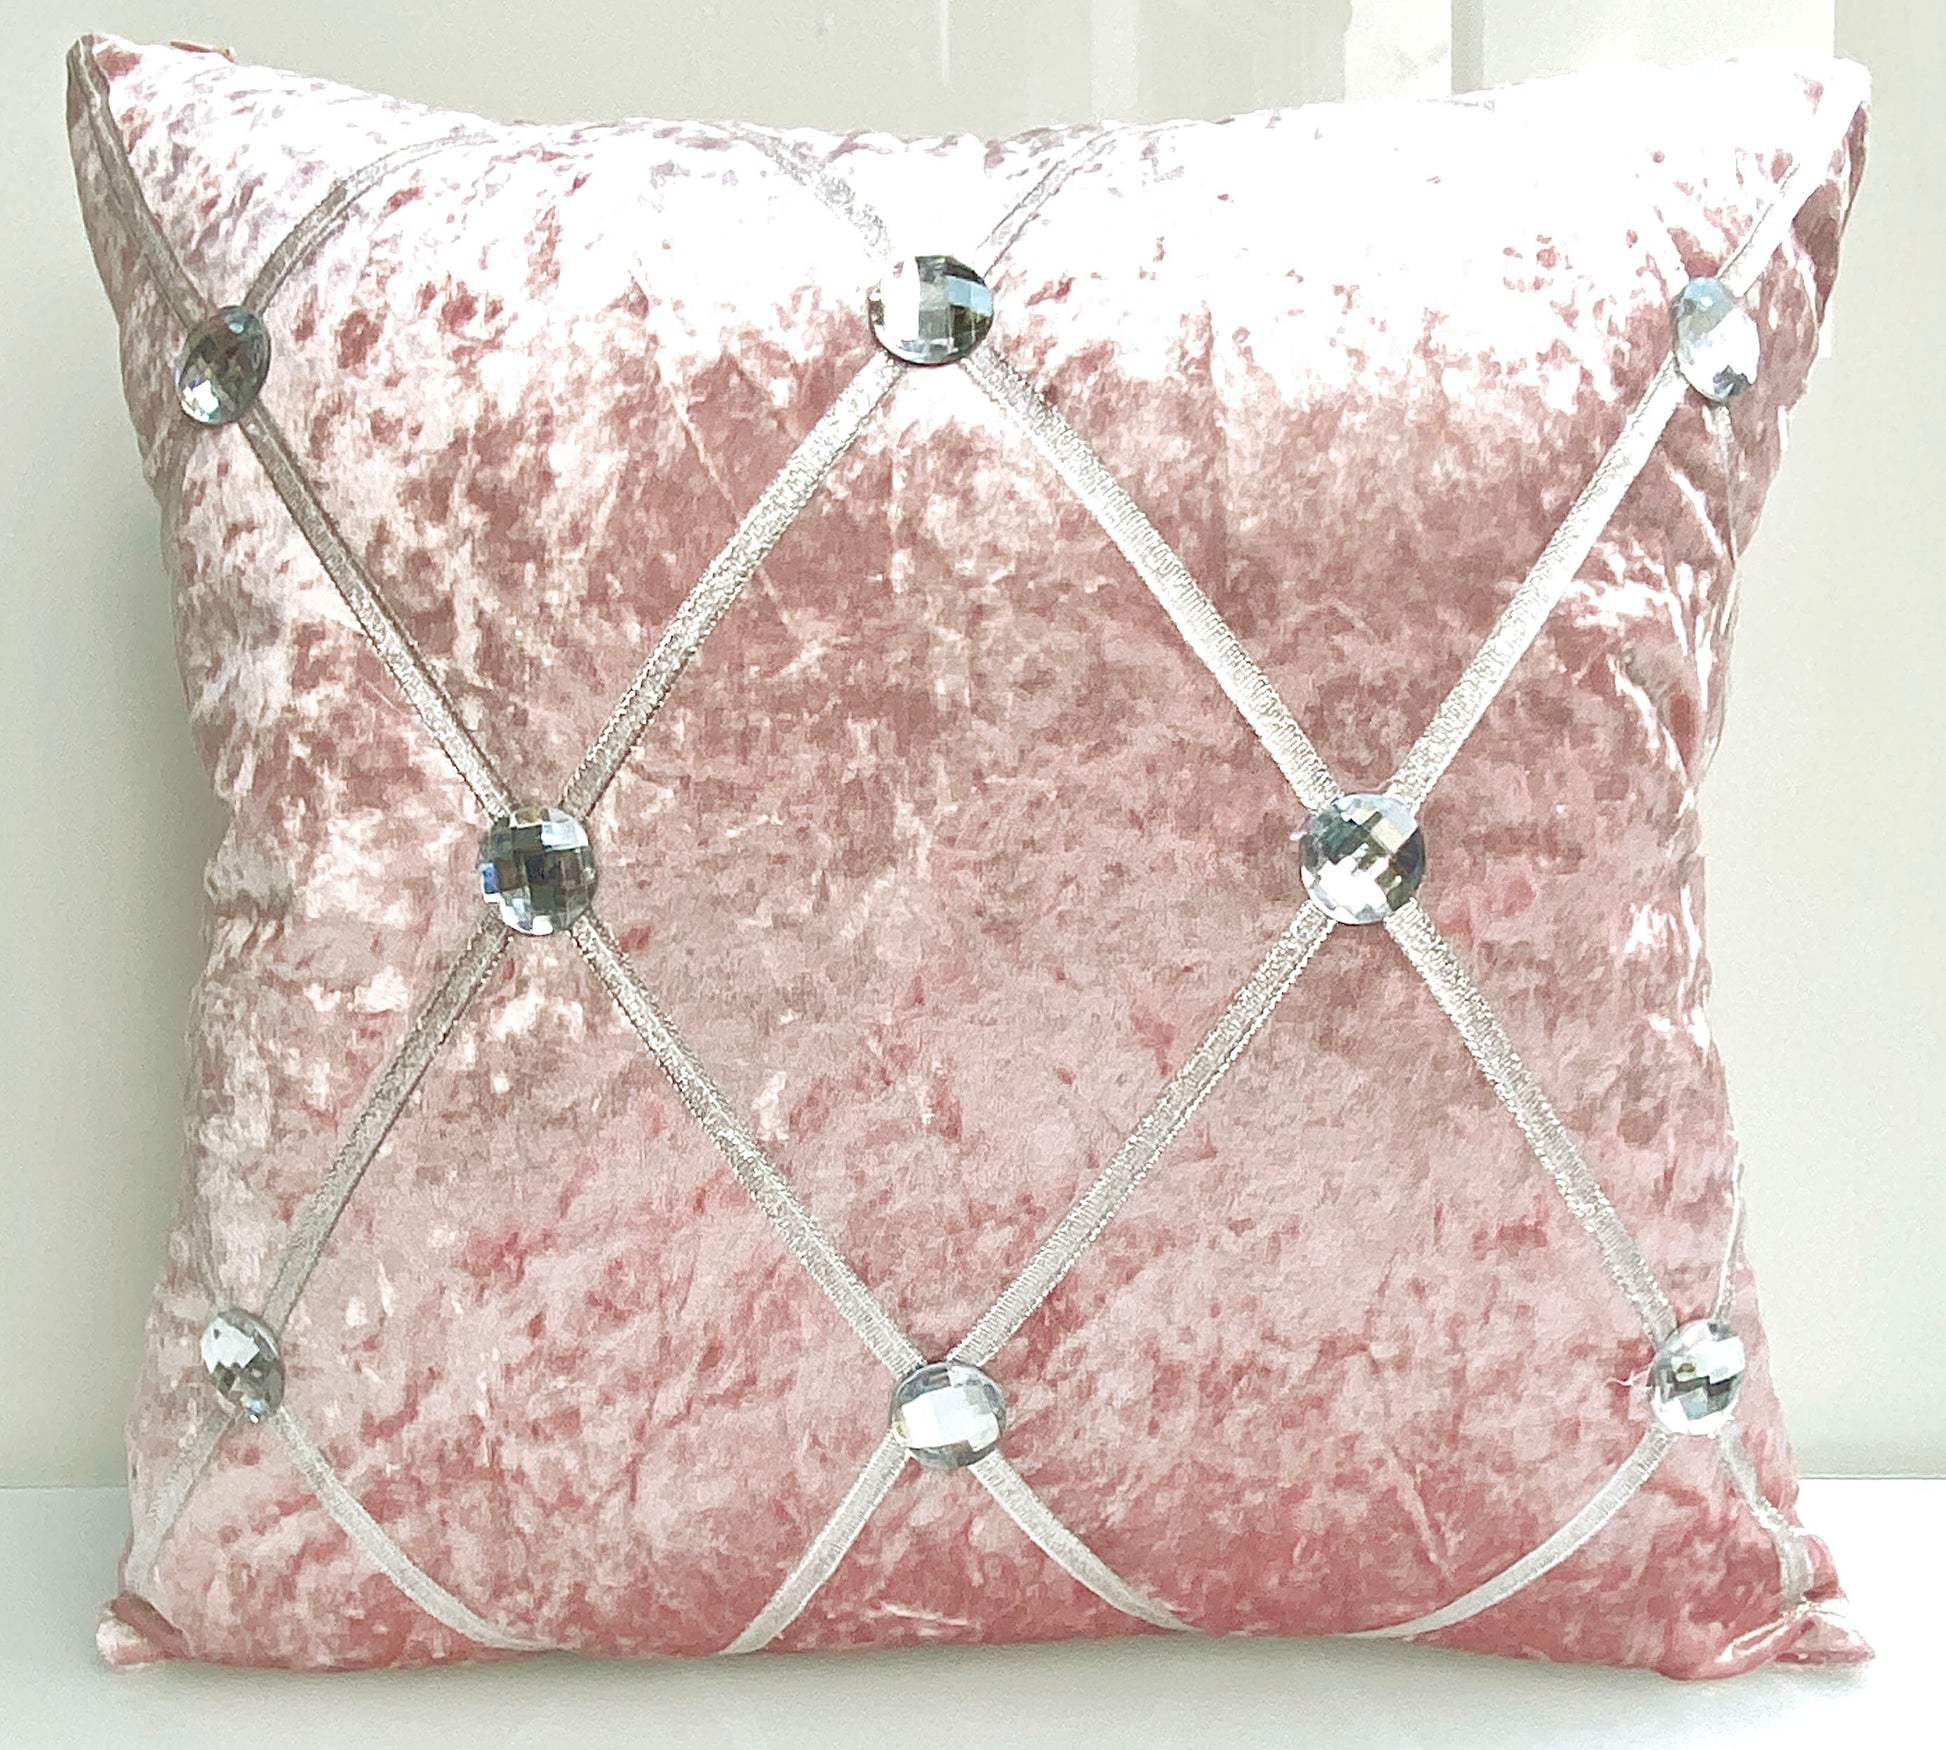 Large Crush Velvet Diamante Chesterfield Cushions or Covers Blush Pink